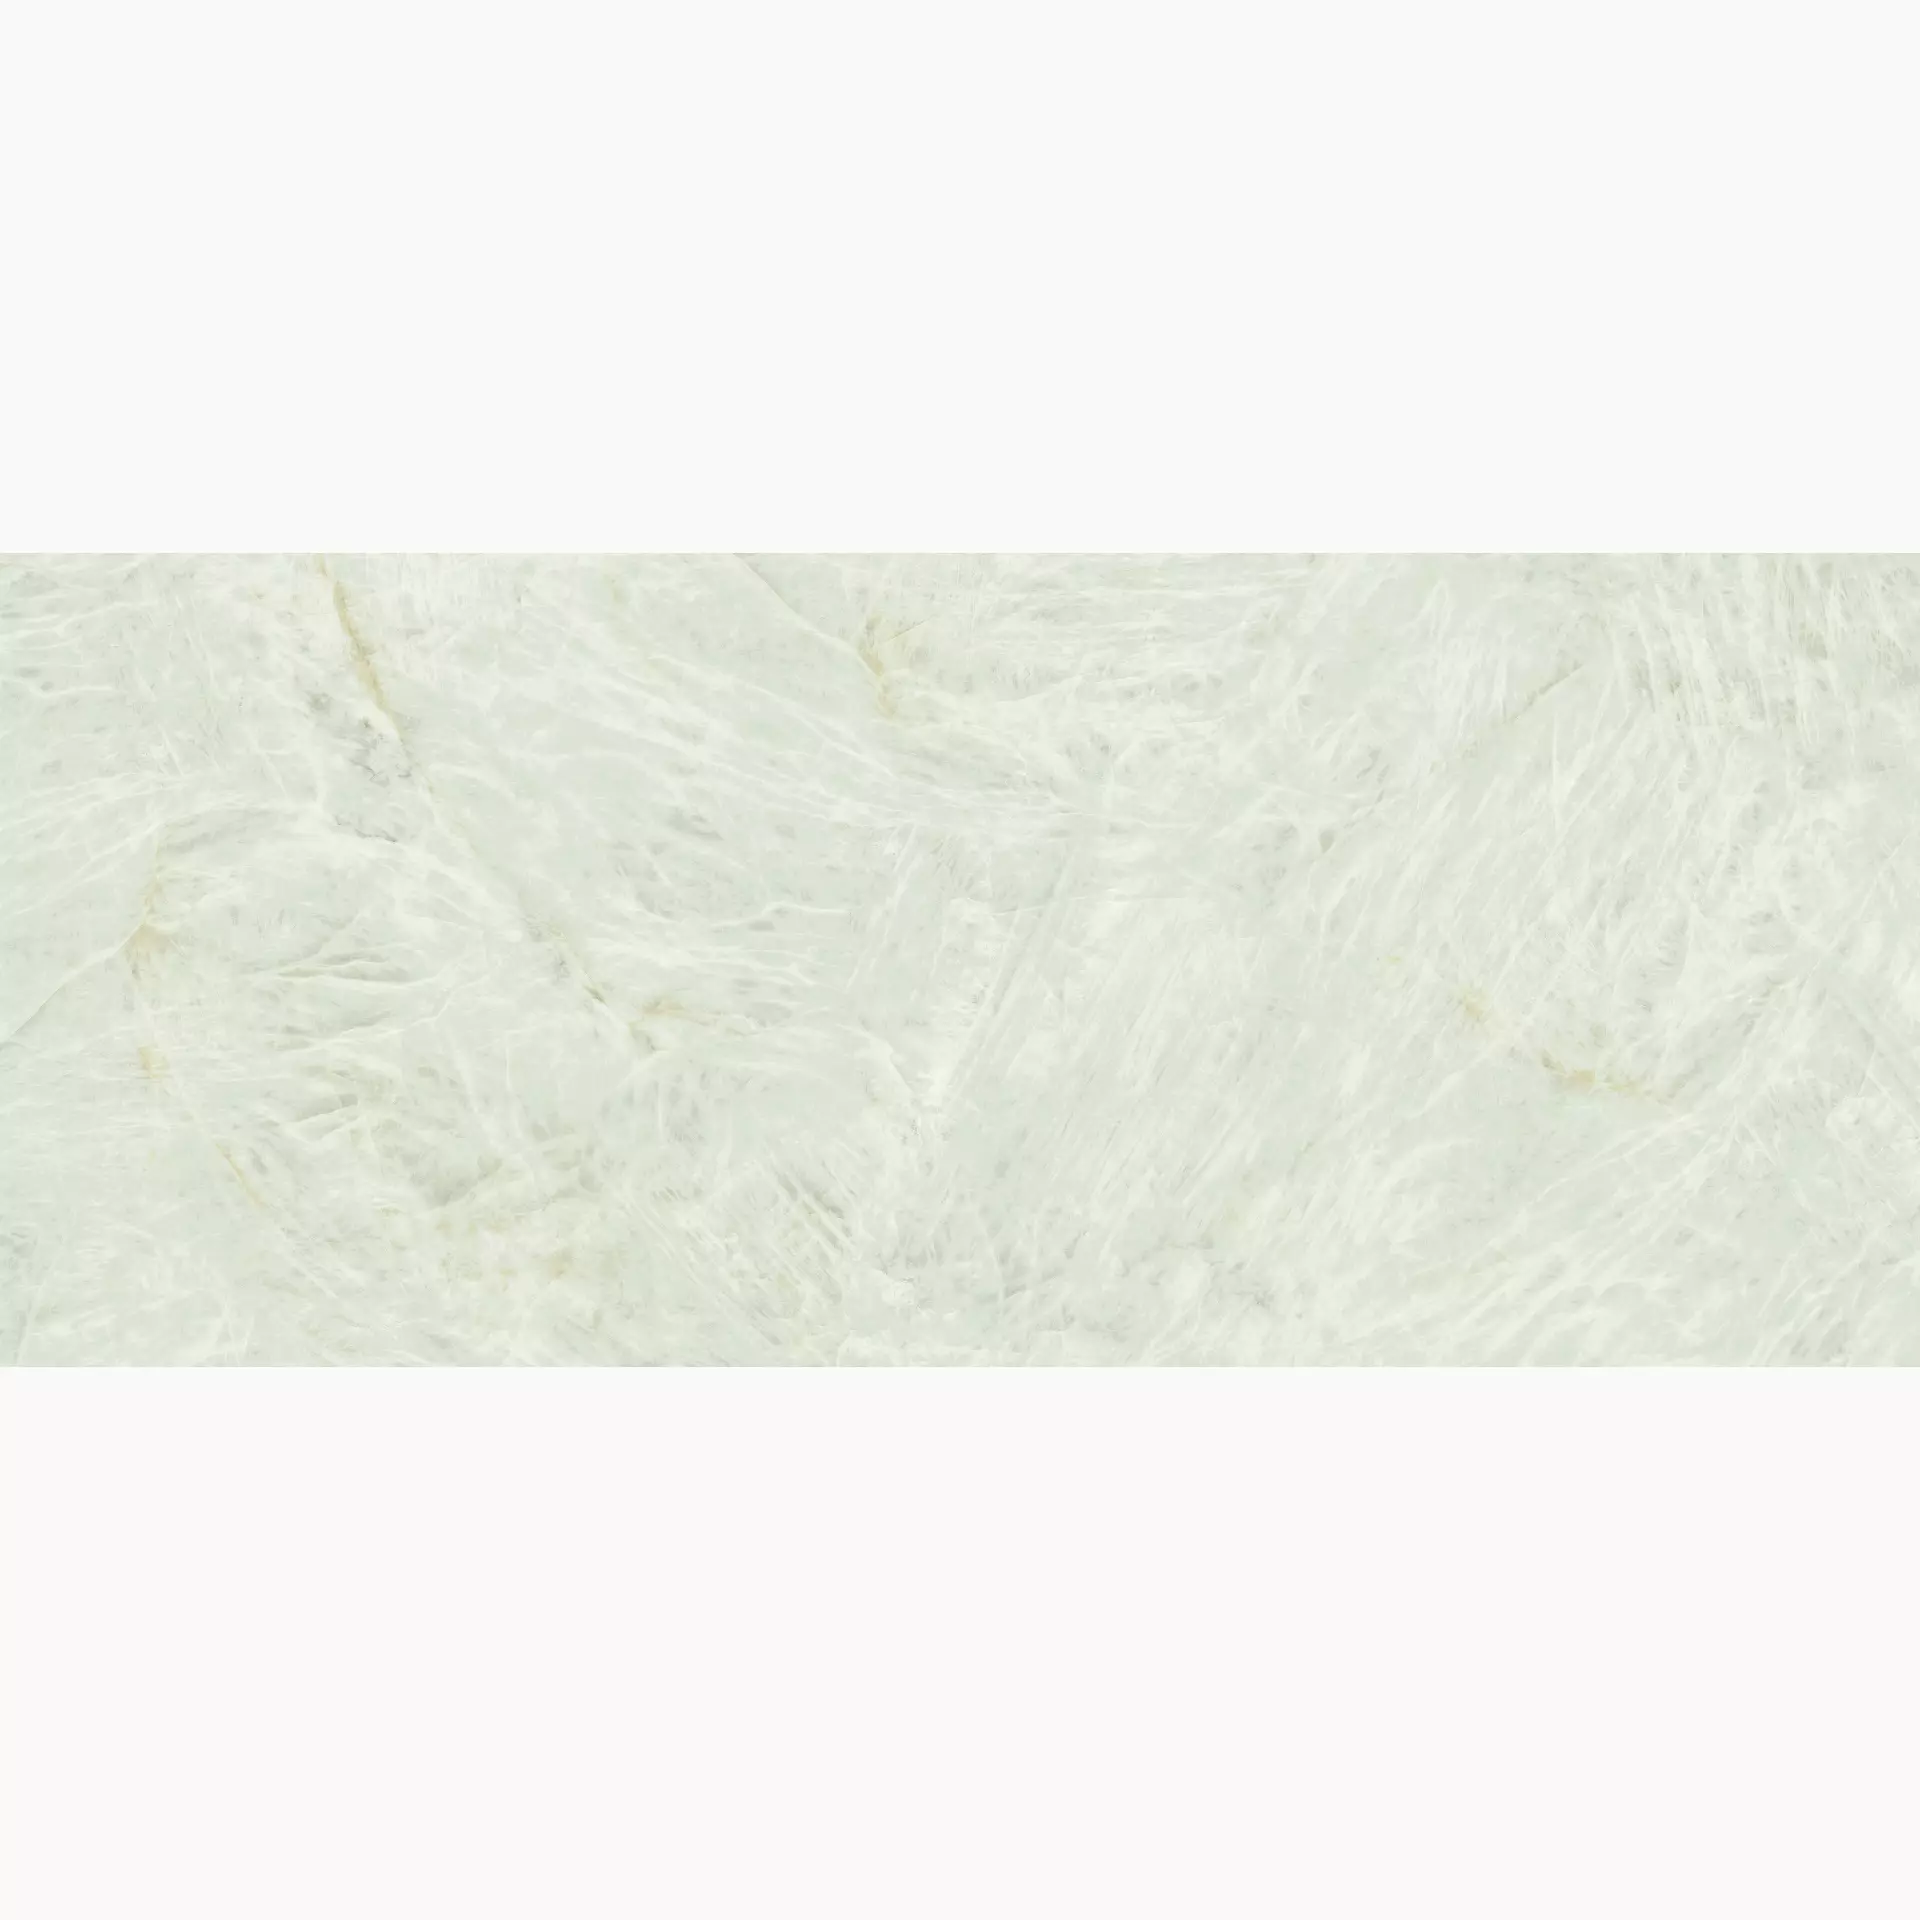 Atlasconcorde Marvel Gala Crystal White Lappato AFXW 120x278cm rectified 6mm